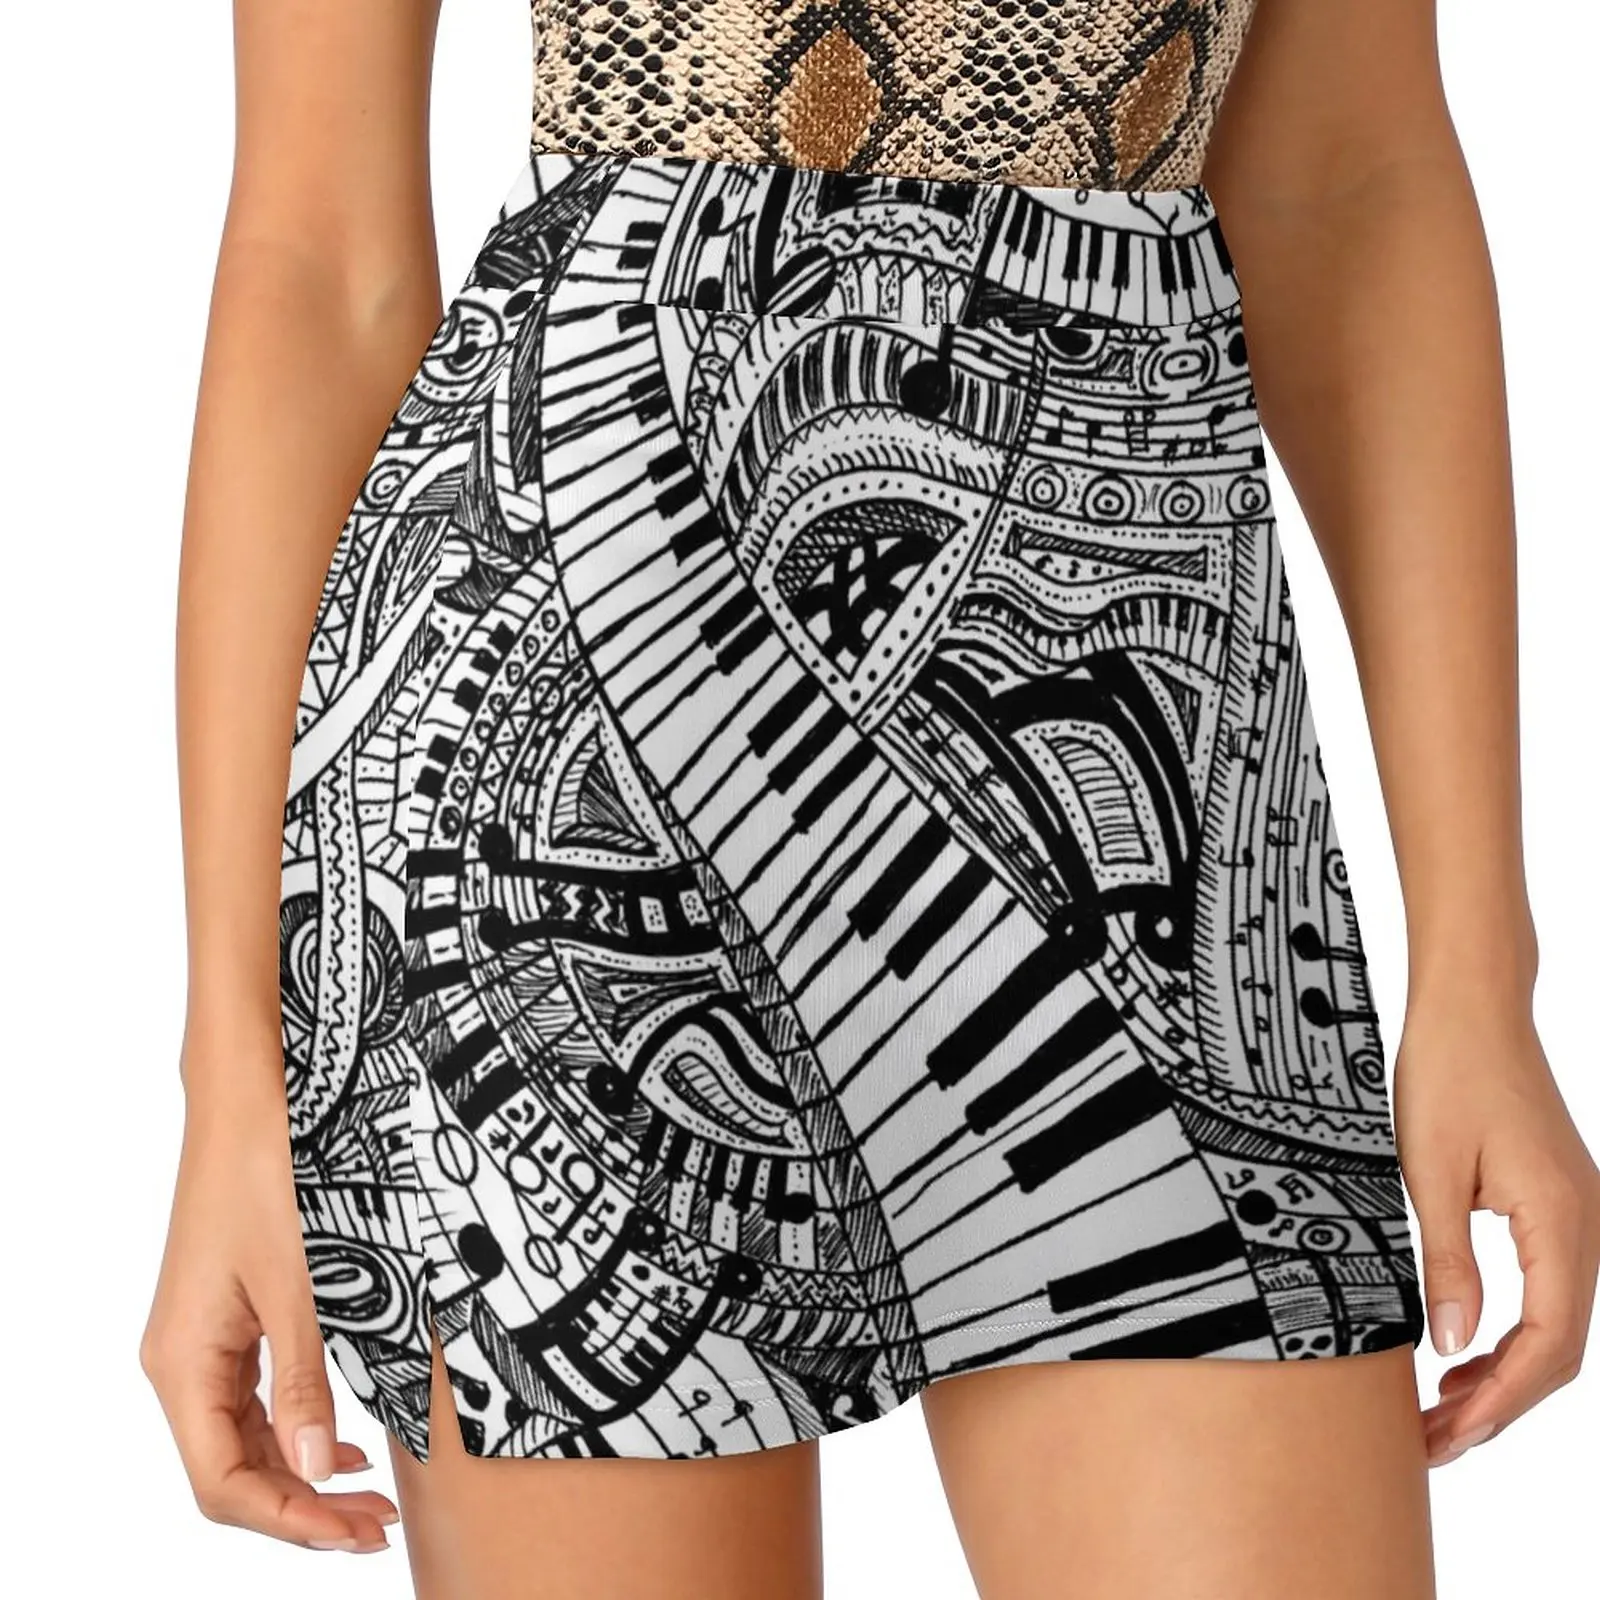 Classical music doodle with piano keyboard Light Proof Trouser Skirt novelty in clothes festival outfit women extreme mini dress 2 4g double sided remote control stunt car 4wd car toy with built in music cool 3d light